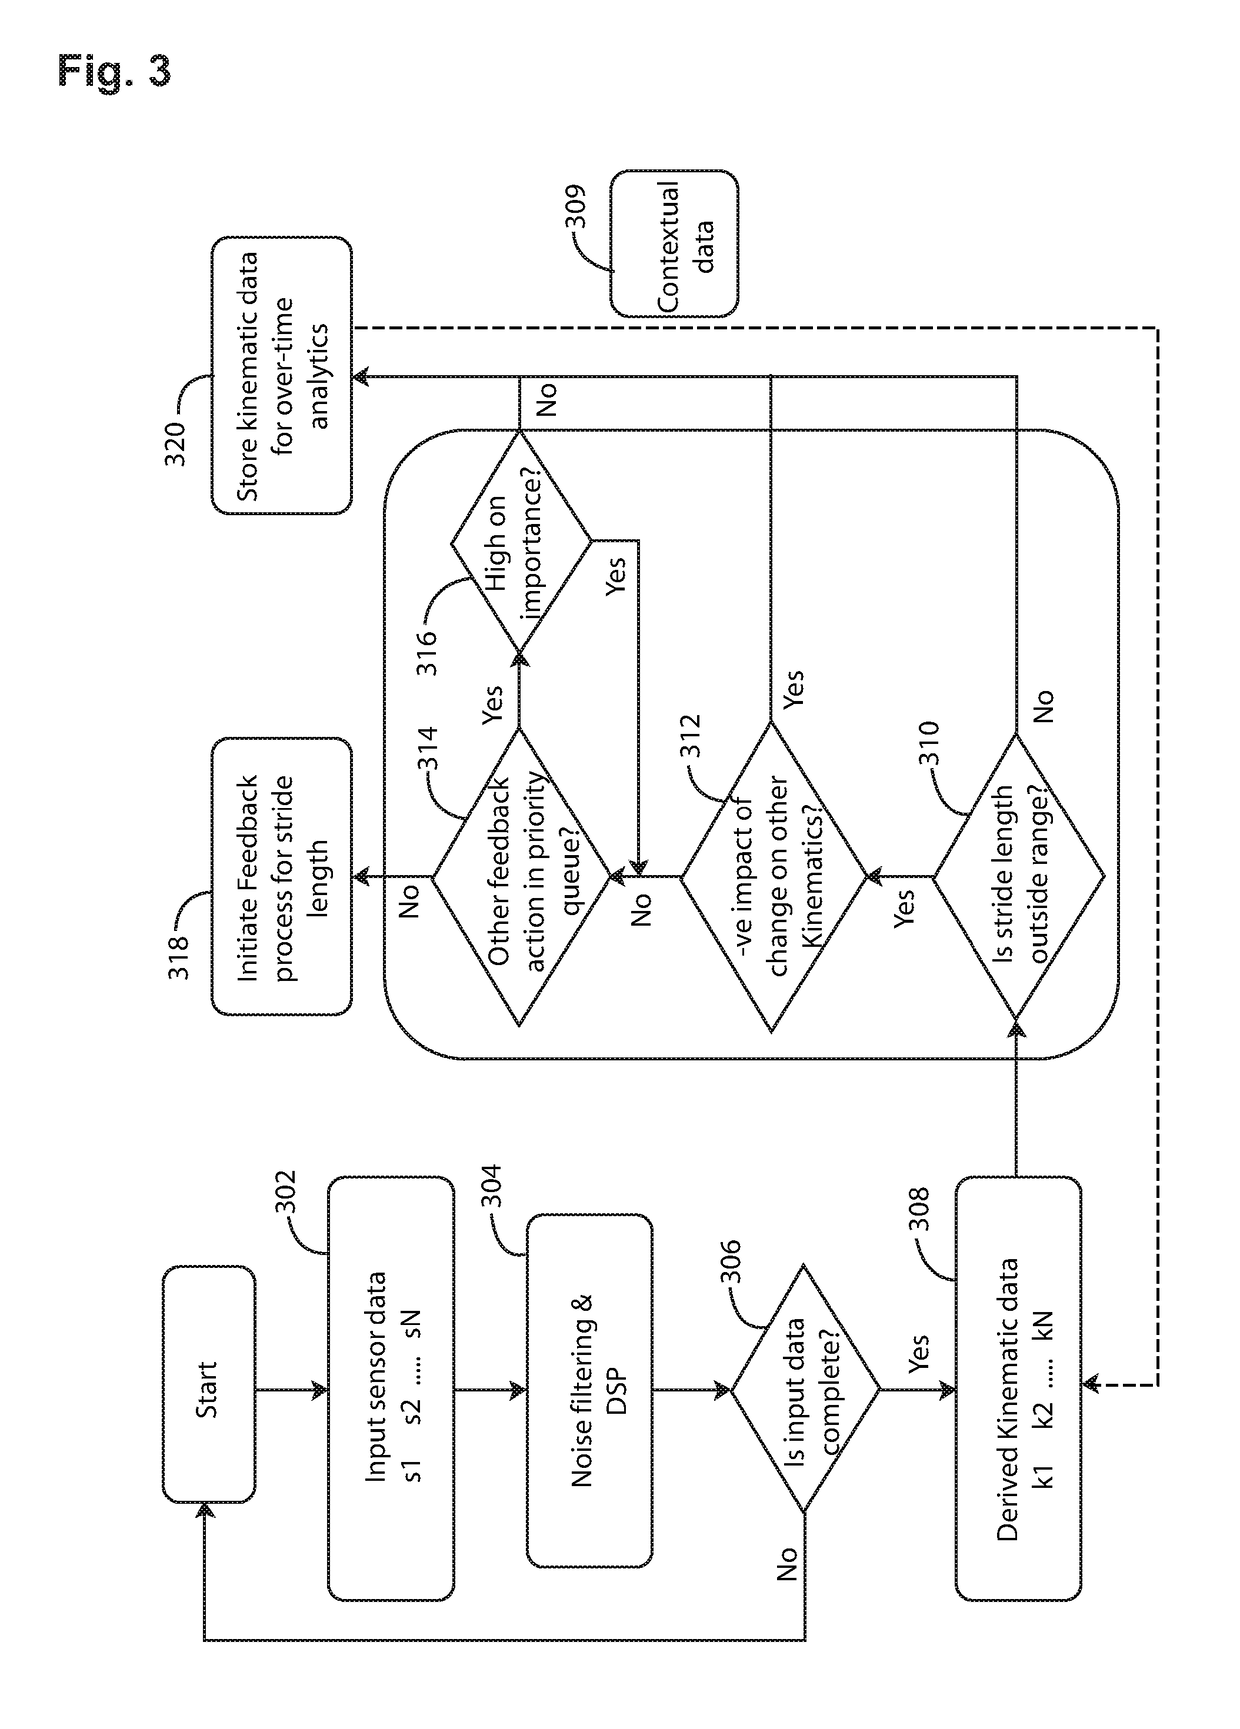 System and Method for Monitoring the Running Technique of a User